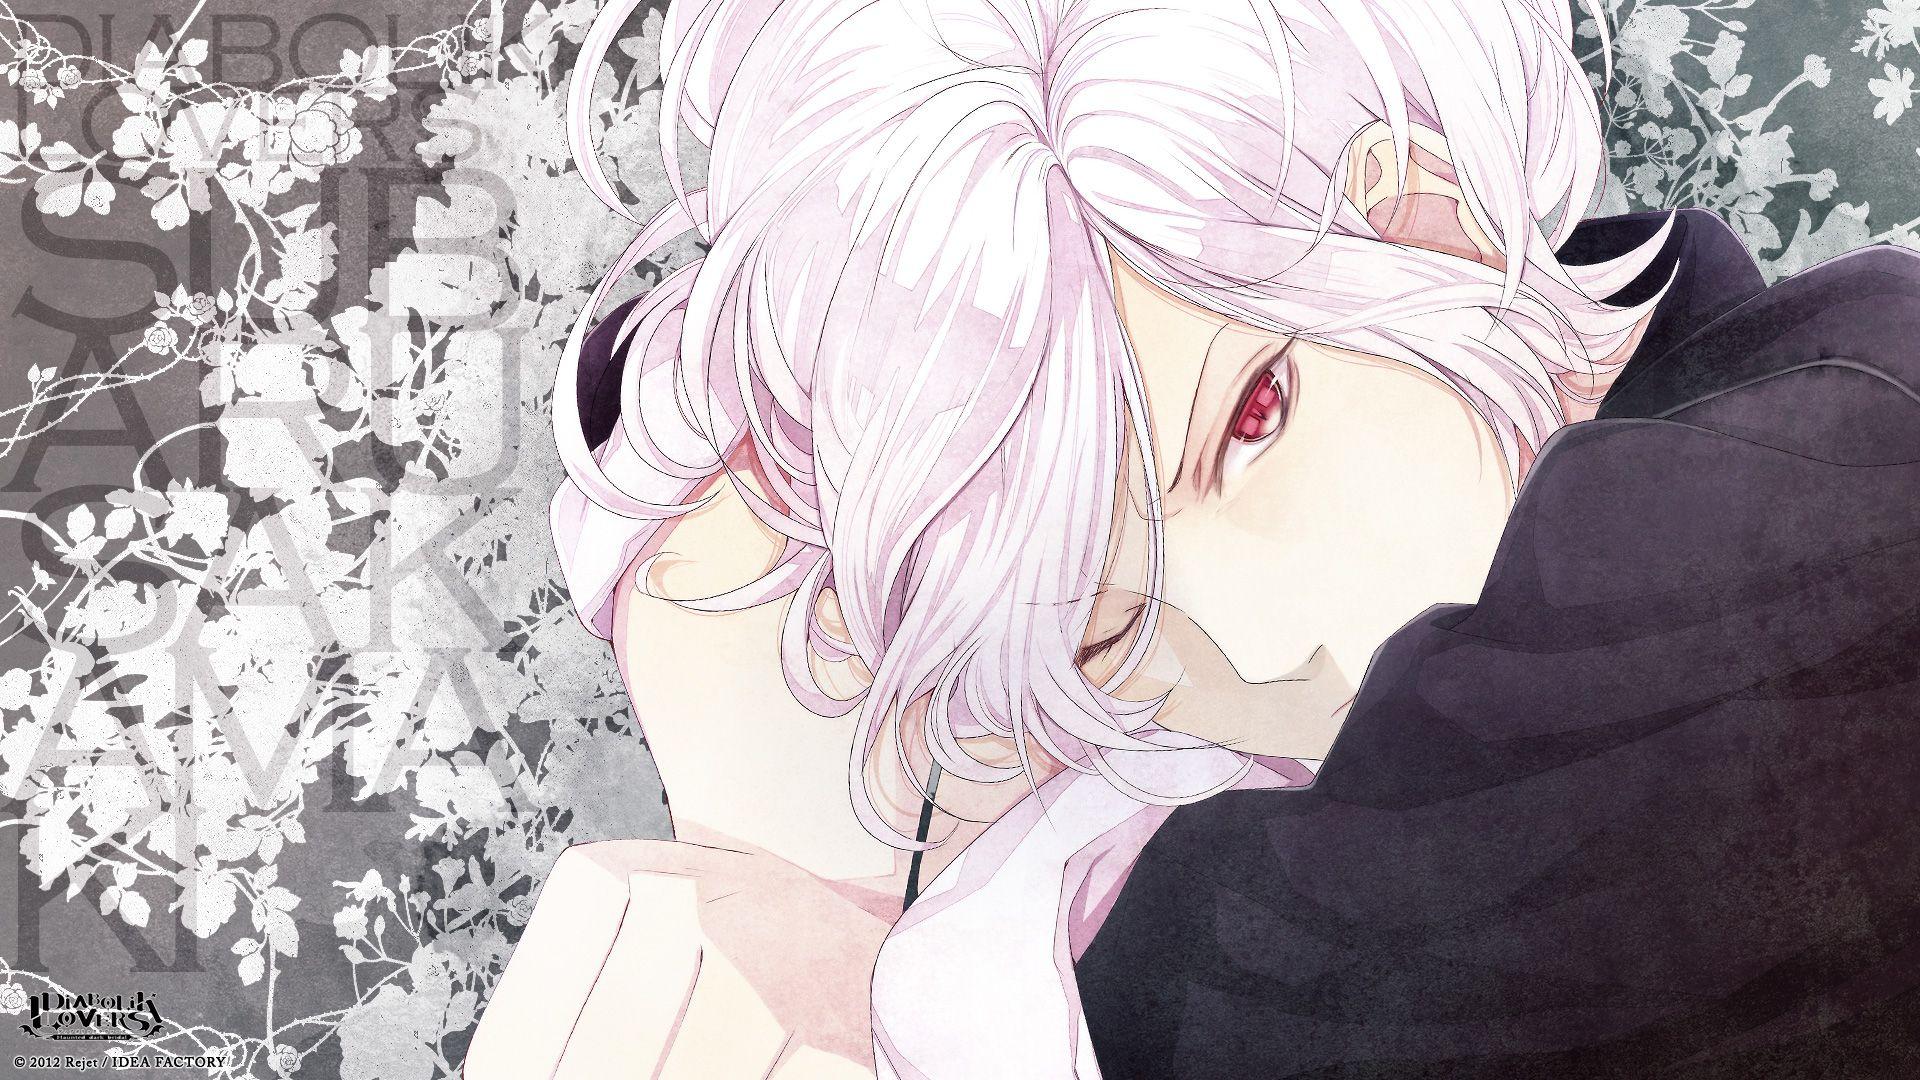 1000+ image about diabolik lovers